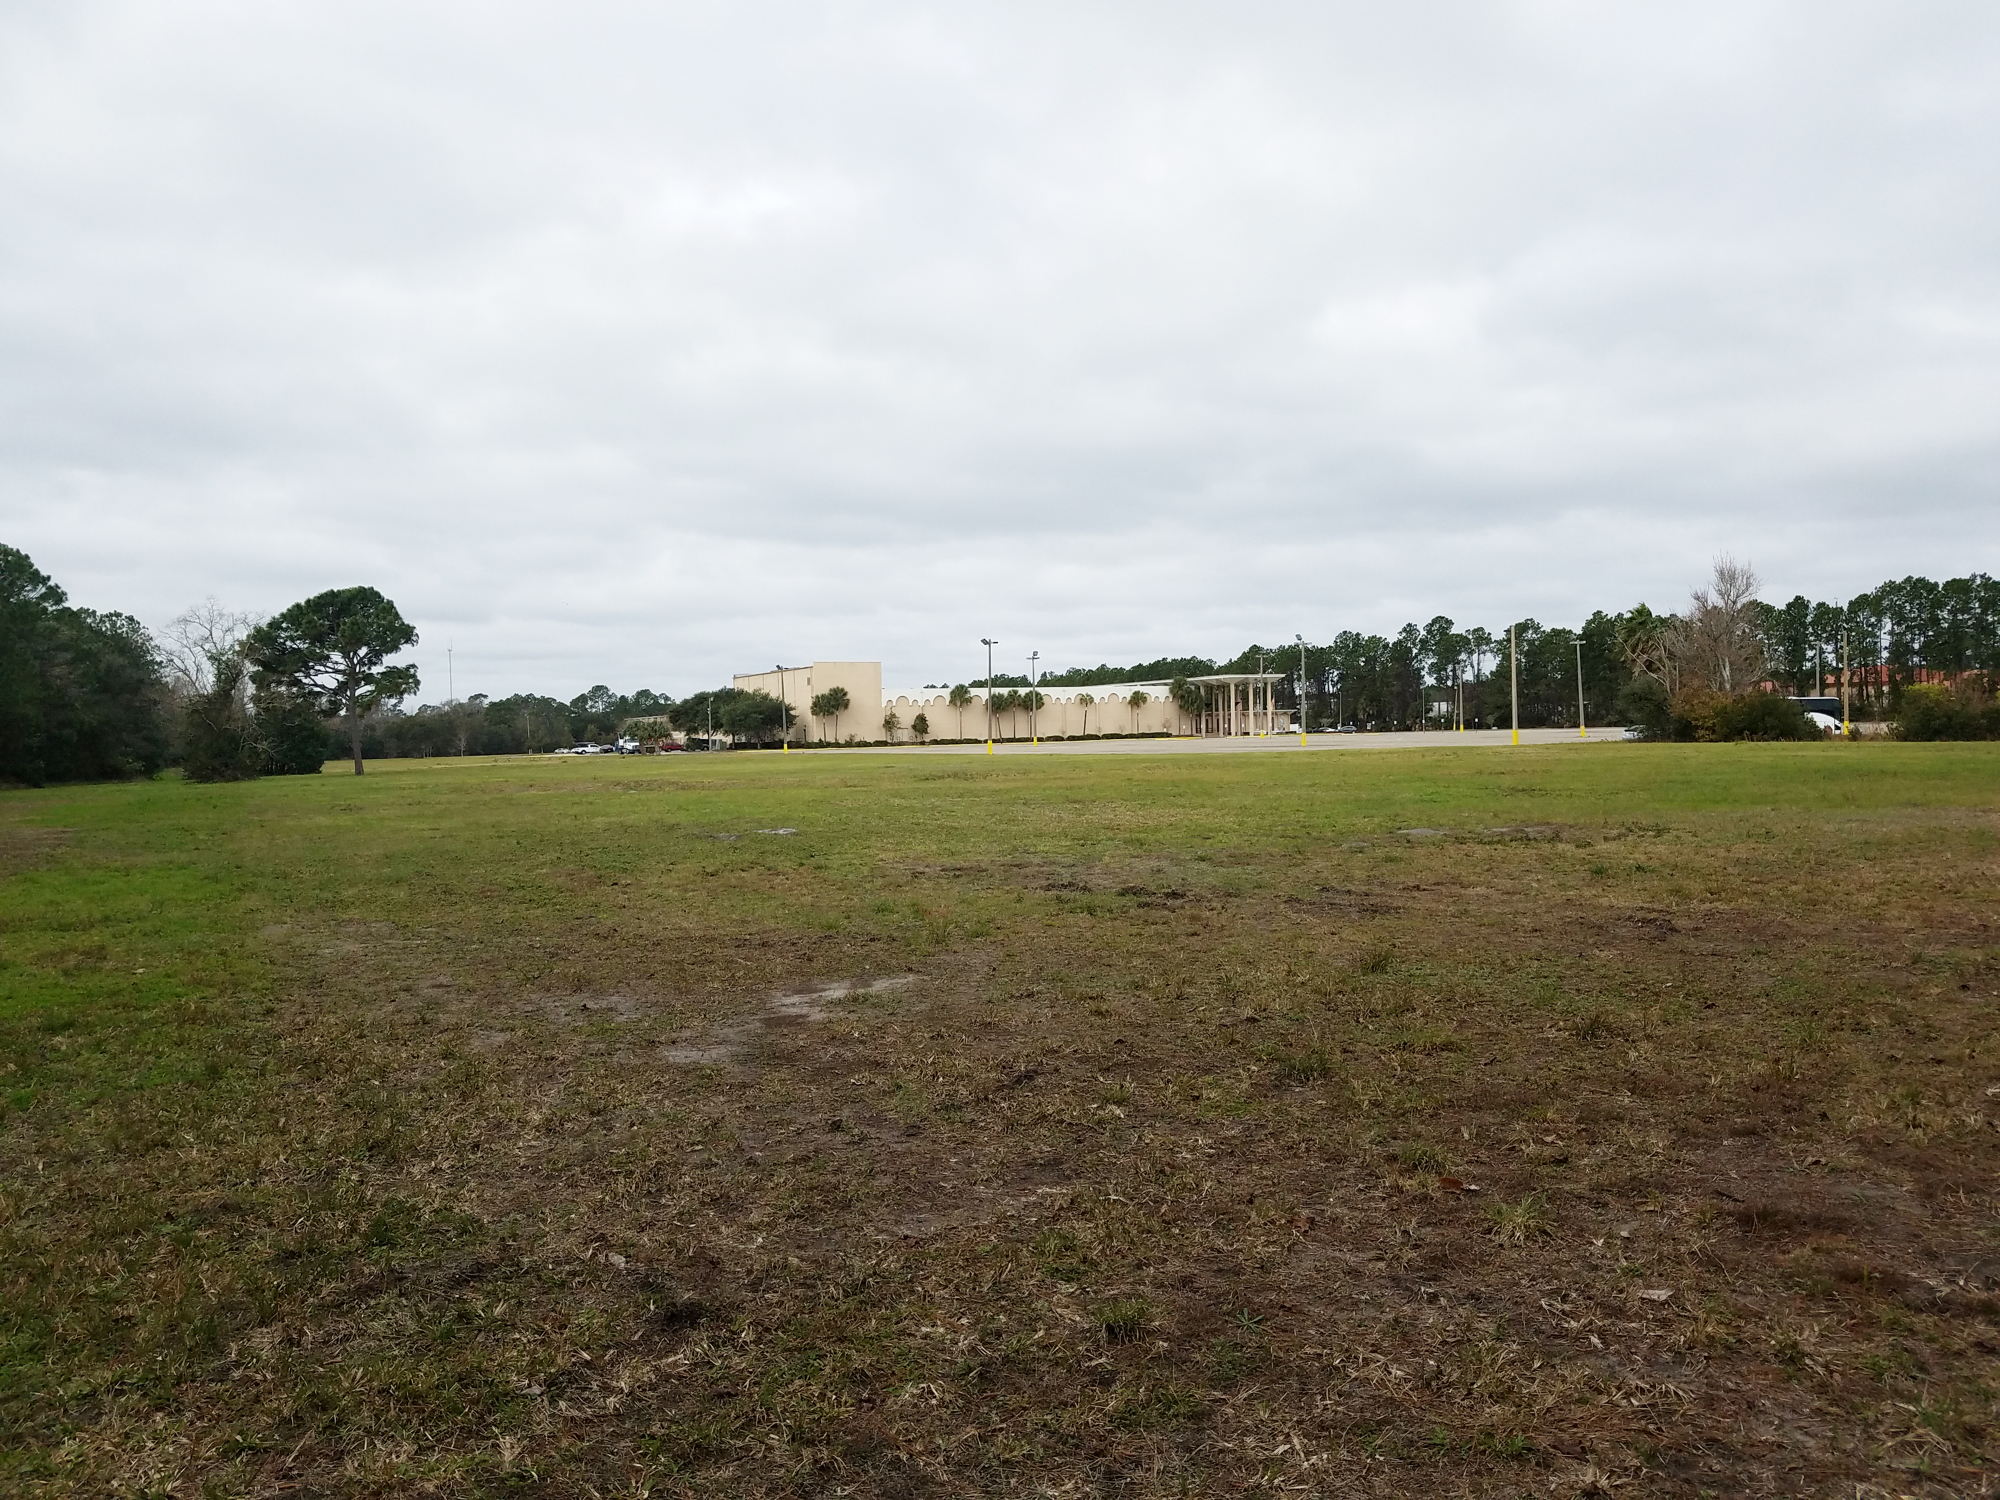 The Morocco Shrine Center is a 36.76-acre site along St. Johns Bluff Road S.